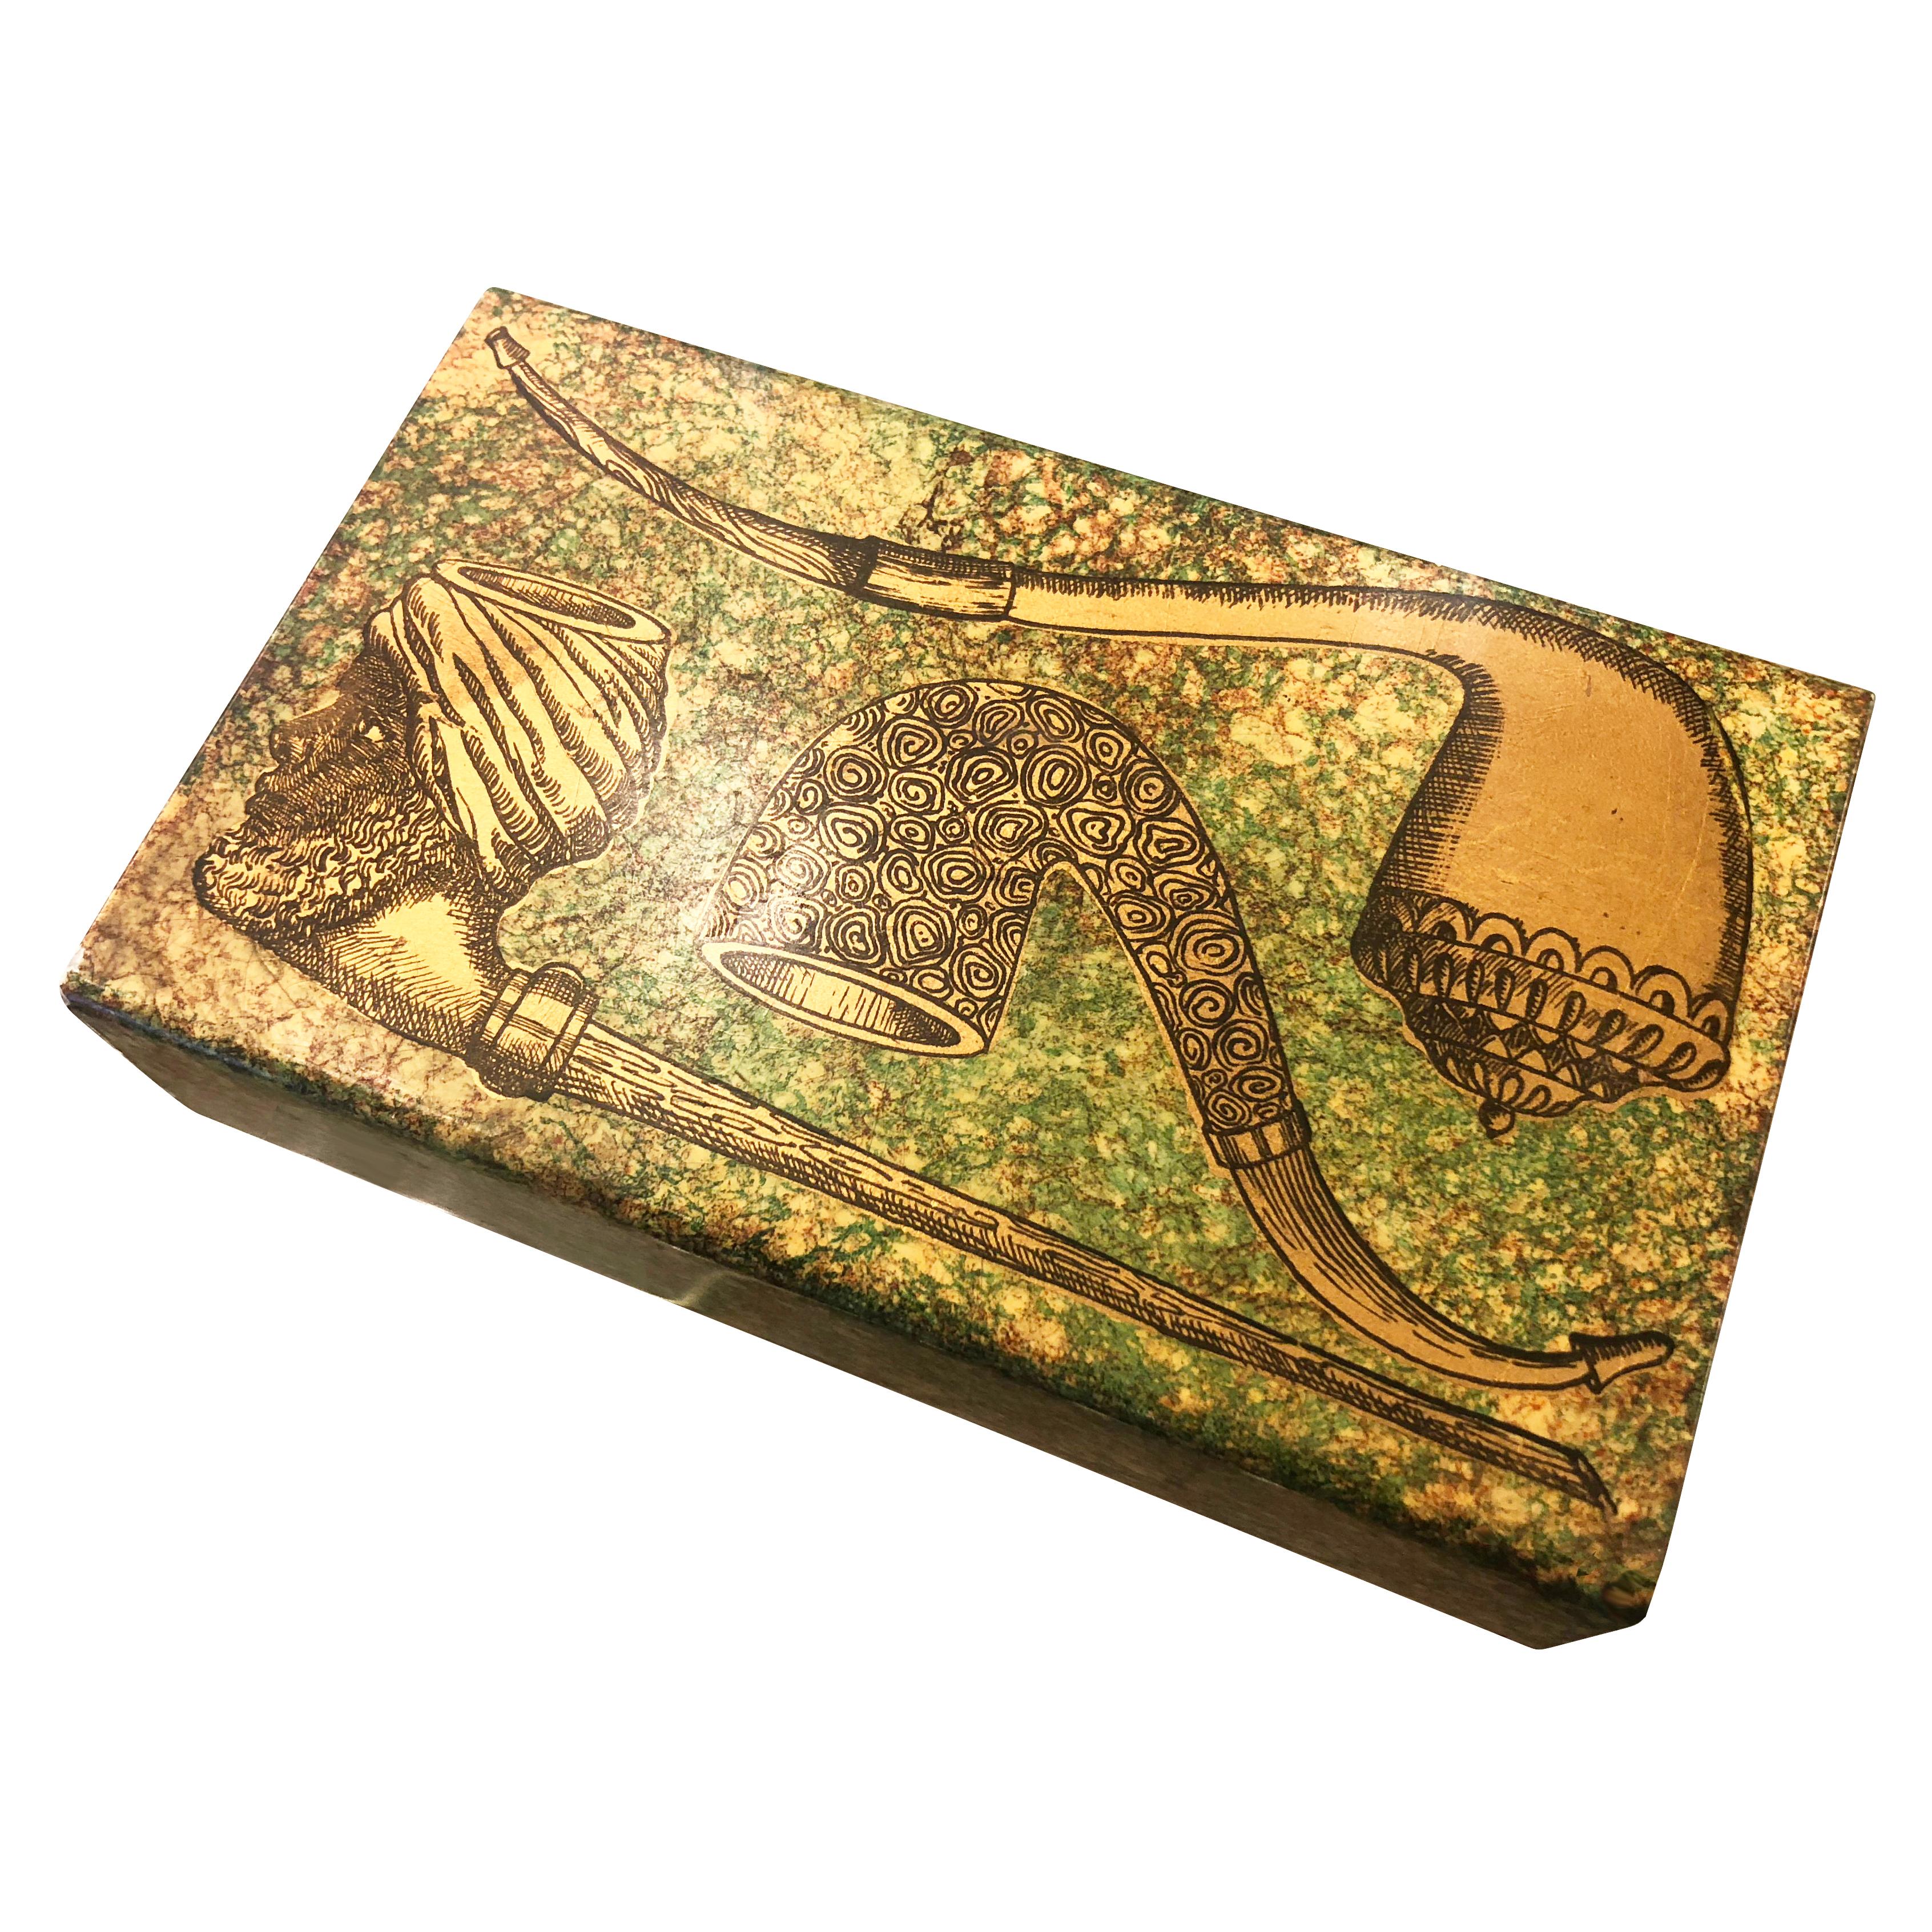 Vintage Piero Fornasetti box featuring a pipe motif. Painted metal cover with sliding wood tray. Felted bottom.

Condition: Excellent vintage condition, minor wear consistent with age and use

Measures: Width 7”

Depth 4.25”

Height 2”.

